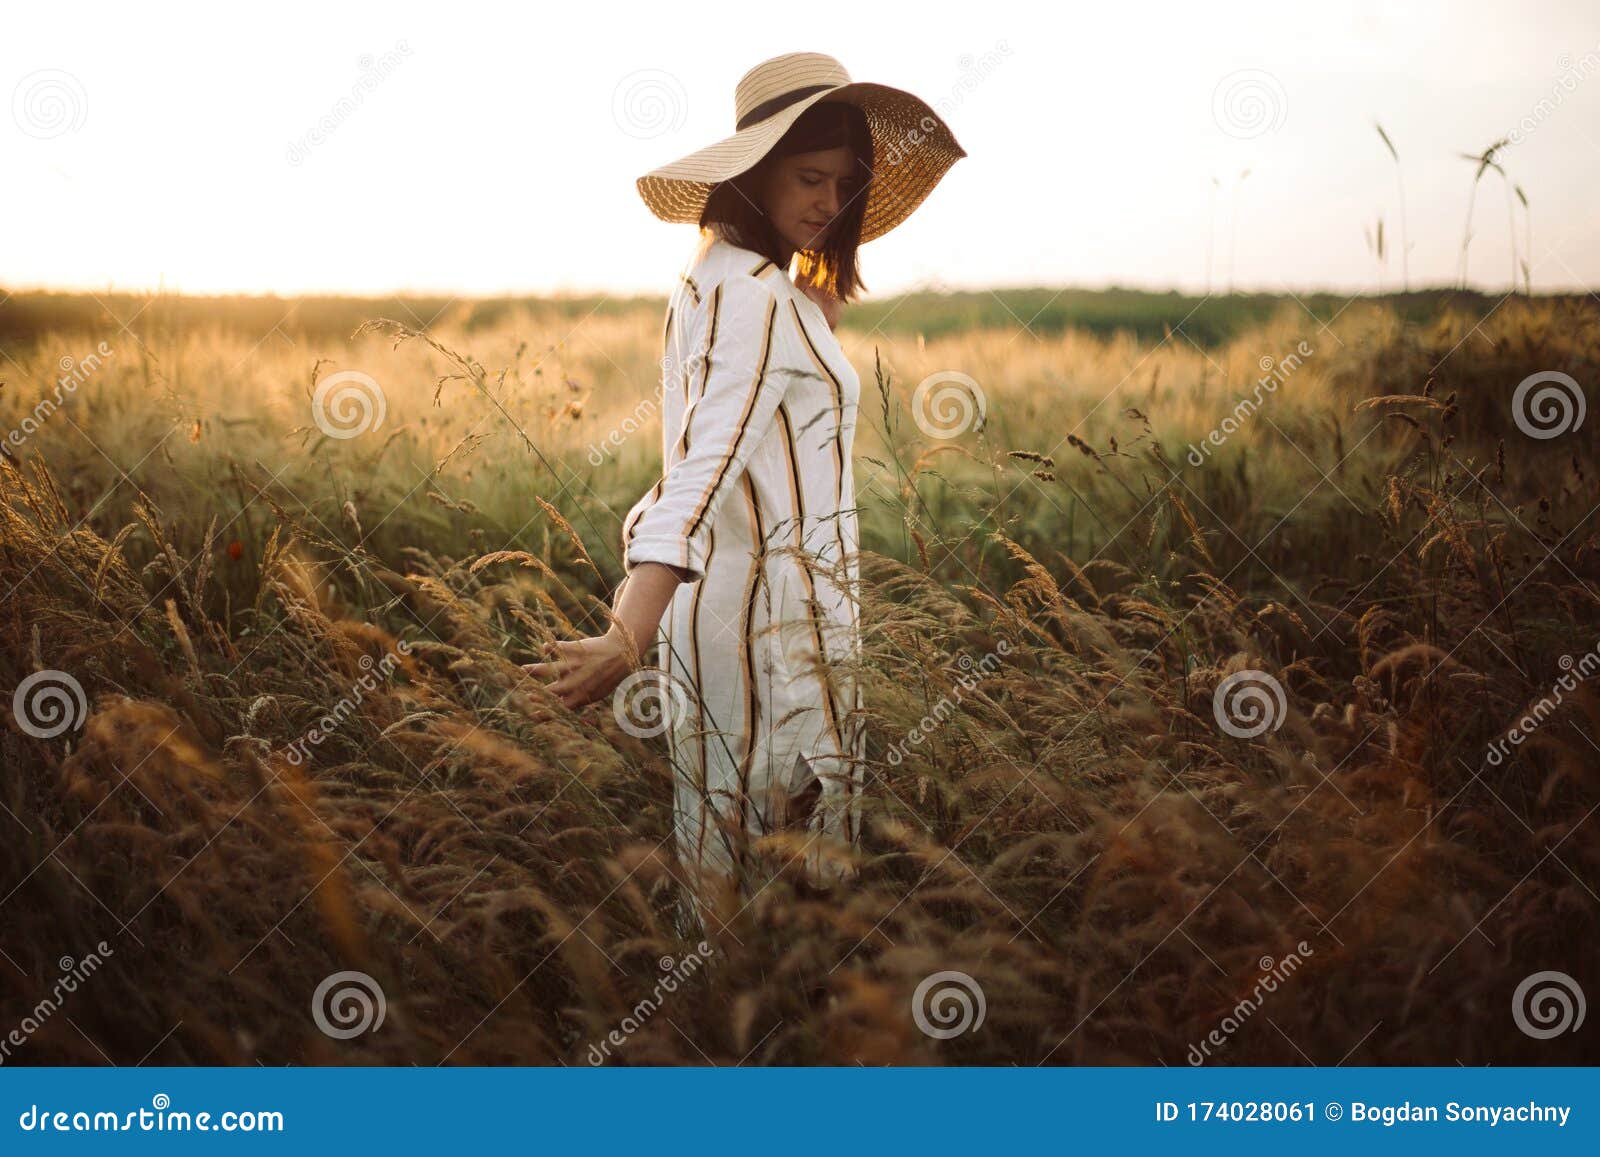 Woman in Rustic Dress and Hat Walking in Wildflowers and Herbs in ...